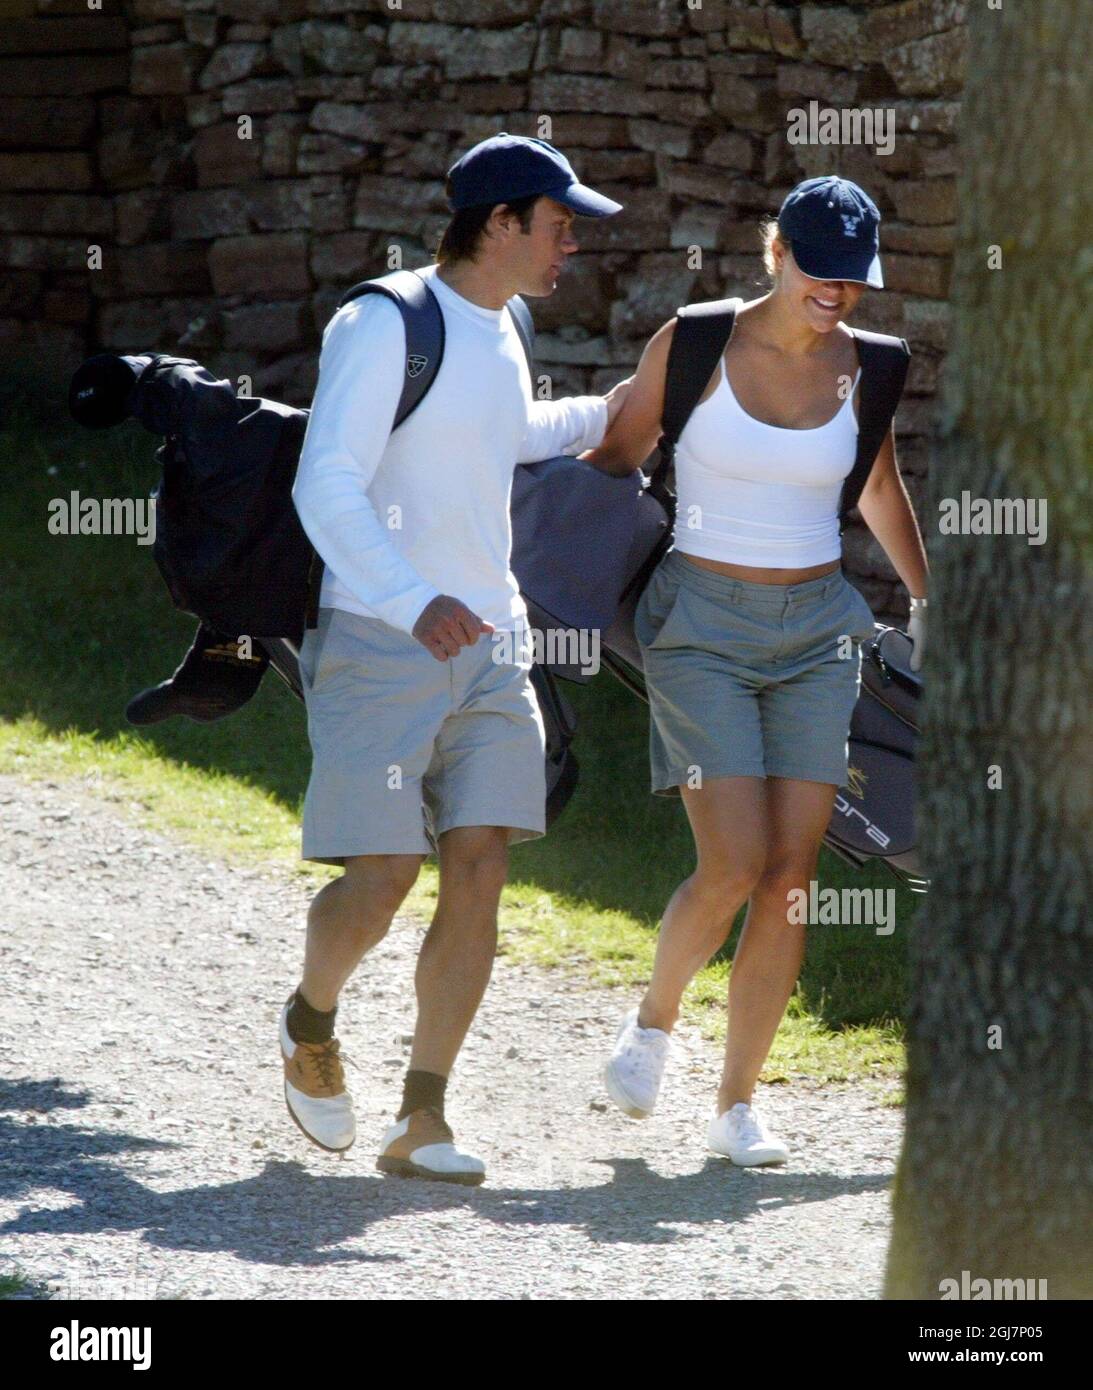 BORGHOLM 20020728 FIRST PICTURE of CROWN PRINCESS VICTORIA and HER BOYFRIEND DANIEL WESTLING at EKERUM'S GOLF COURSE, NOT FAR FROM SOLLIDEN on Ã–LAND FIRST PICTURES OF CROWN PRINCESS VICTORIA AND HER BOYFRIEND DANIEL WESTLING PLAYING GOLF AT EKERUM GOLF COURSE DURING THIS WEEKEND NEAR THE SWEDISH ROYAL SUMMAR-RESIDENCE SOLLIDEN ON Ã–LAND, SWEDEN. Photo: Jonas EkstrÃ¶mer/SCANPIX code 4345 *** BETALBILD *** EXCLUSIVE *** Stock Photo